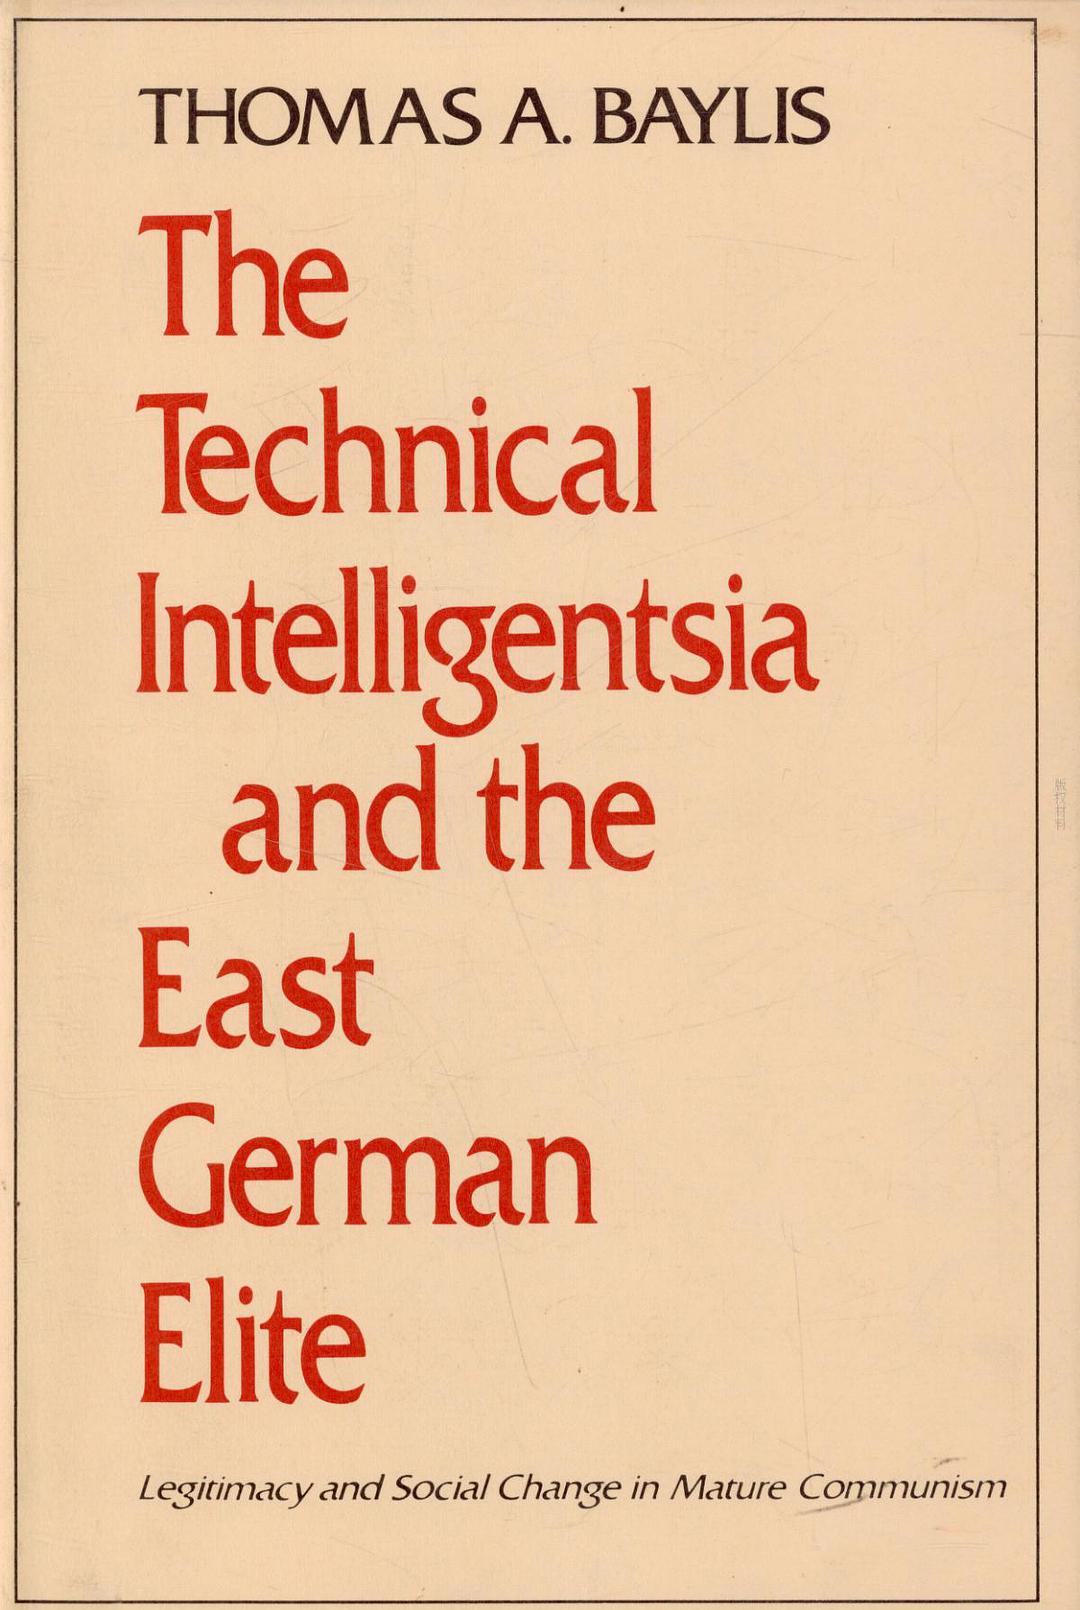 The technical intelligentsia and the East German elite legitimacy and social change in mature communism